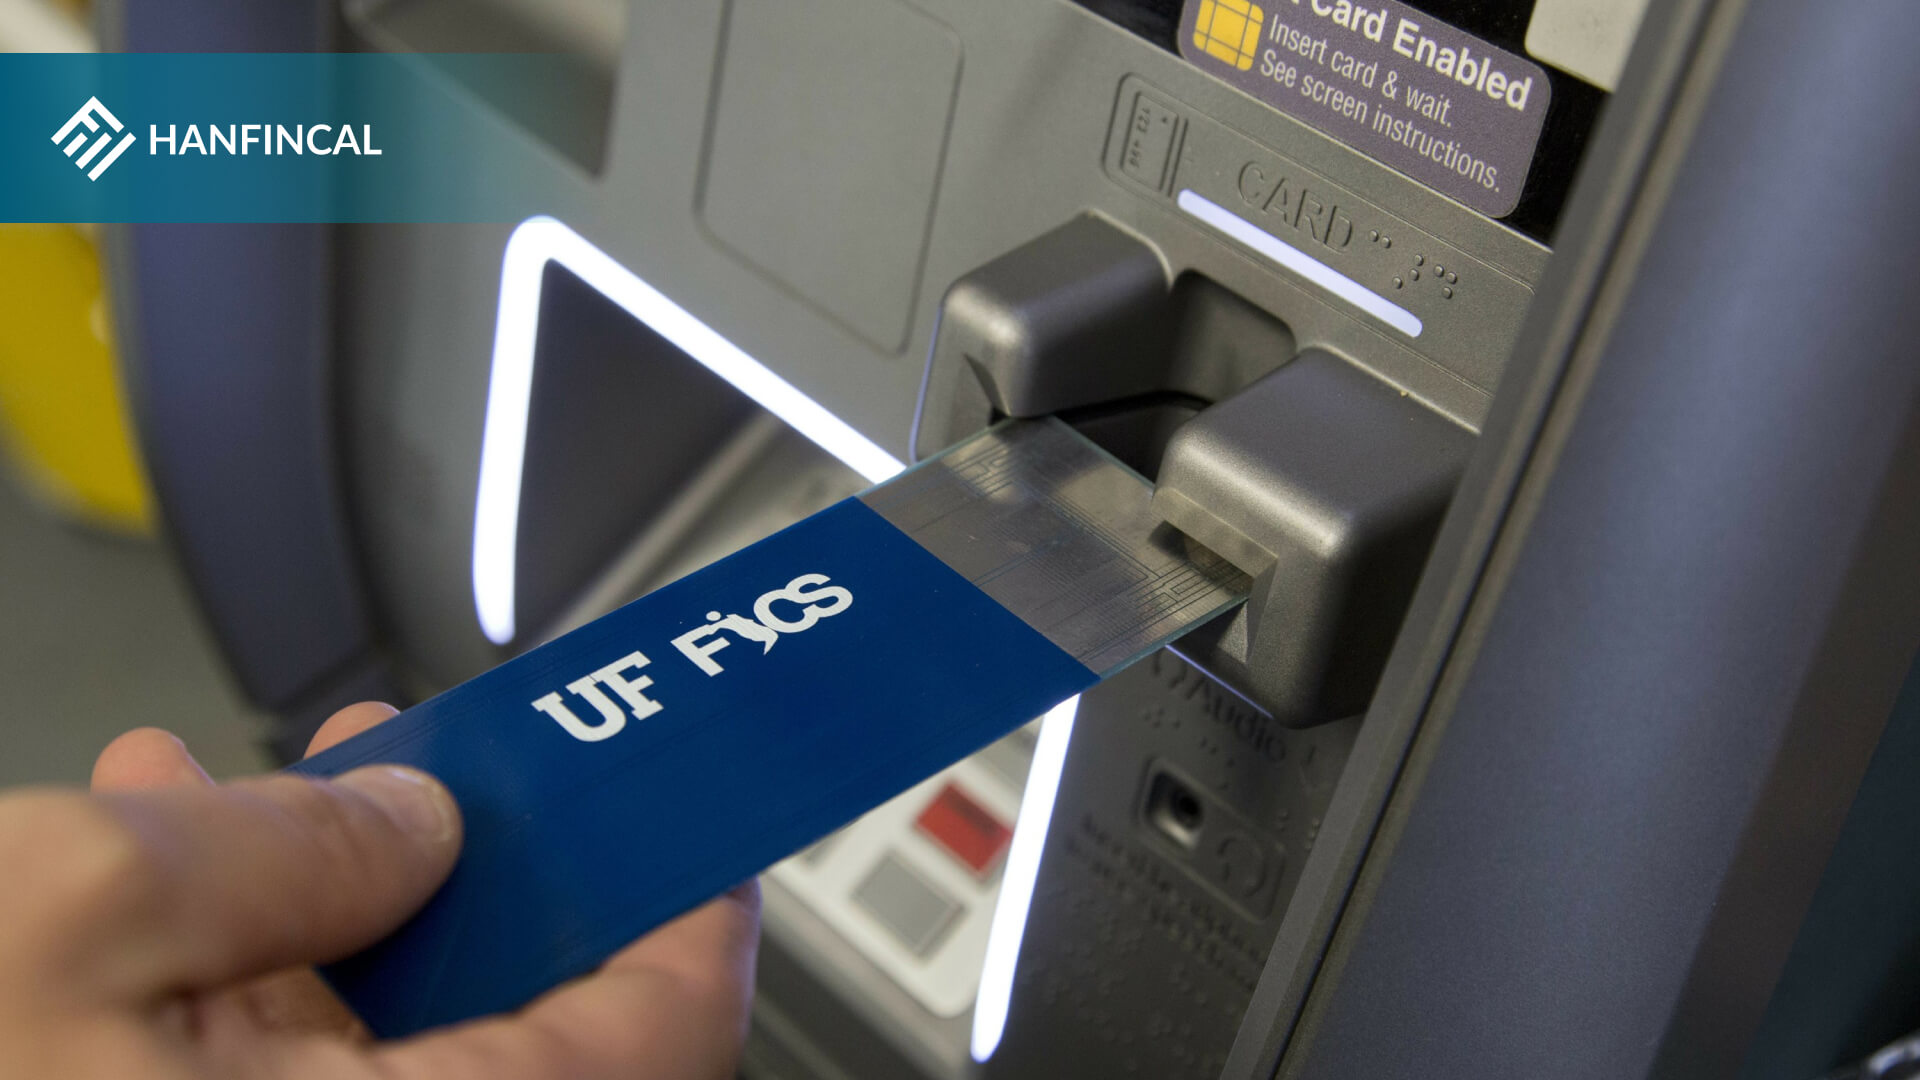 What are credit card skimmers?